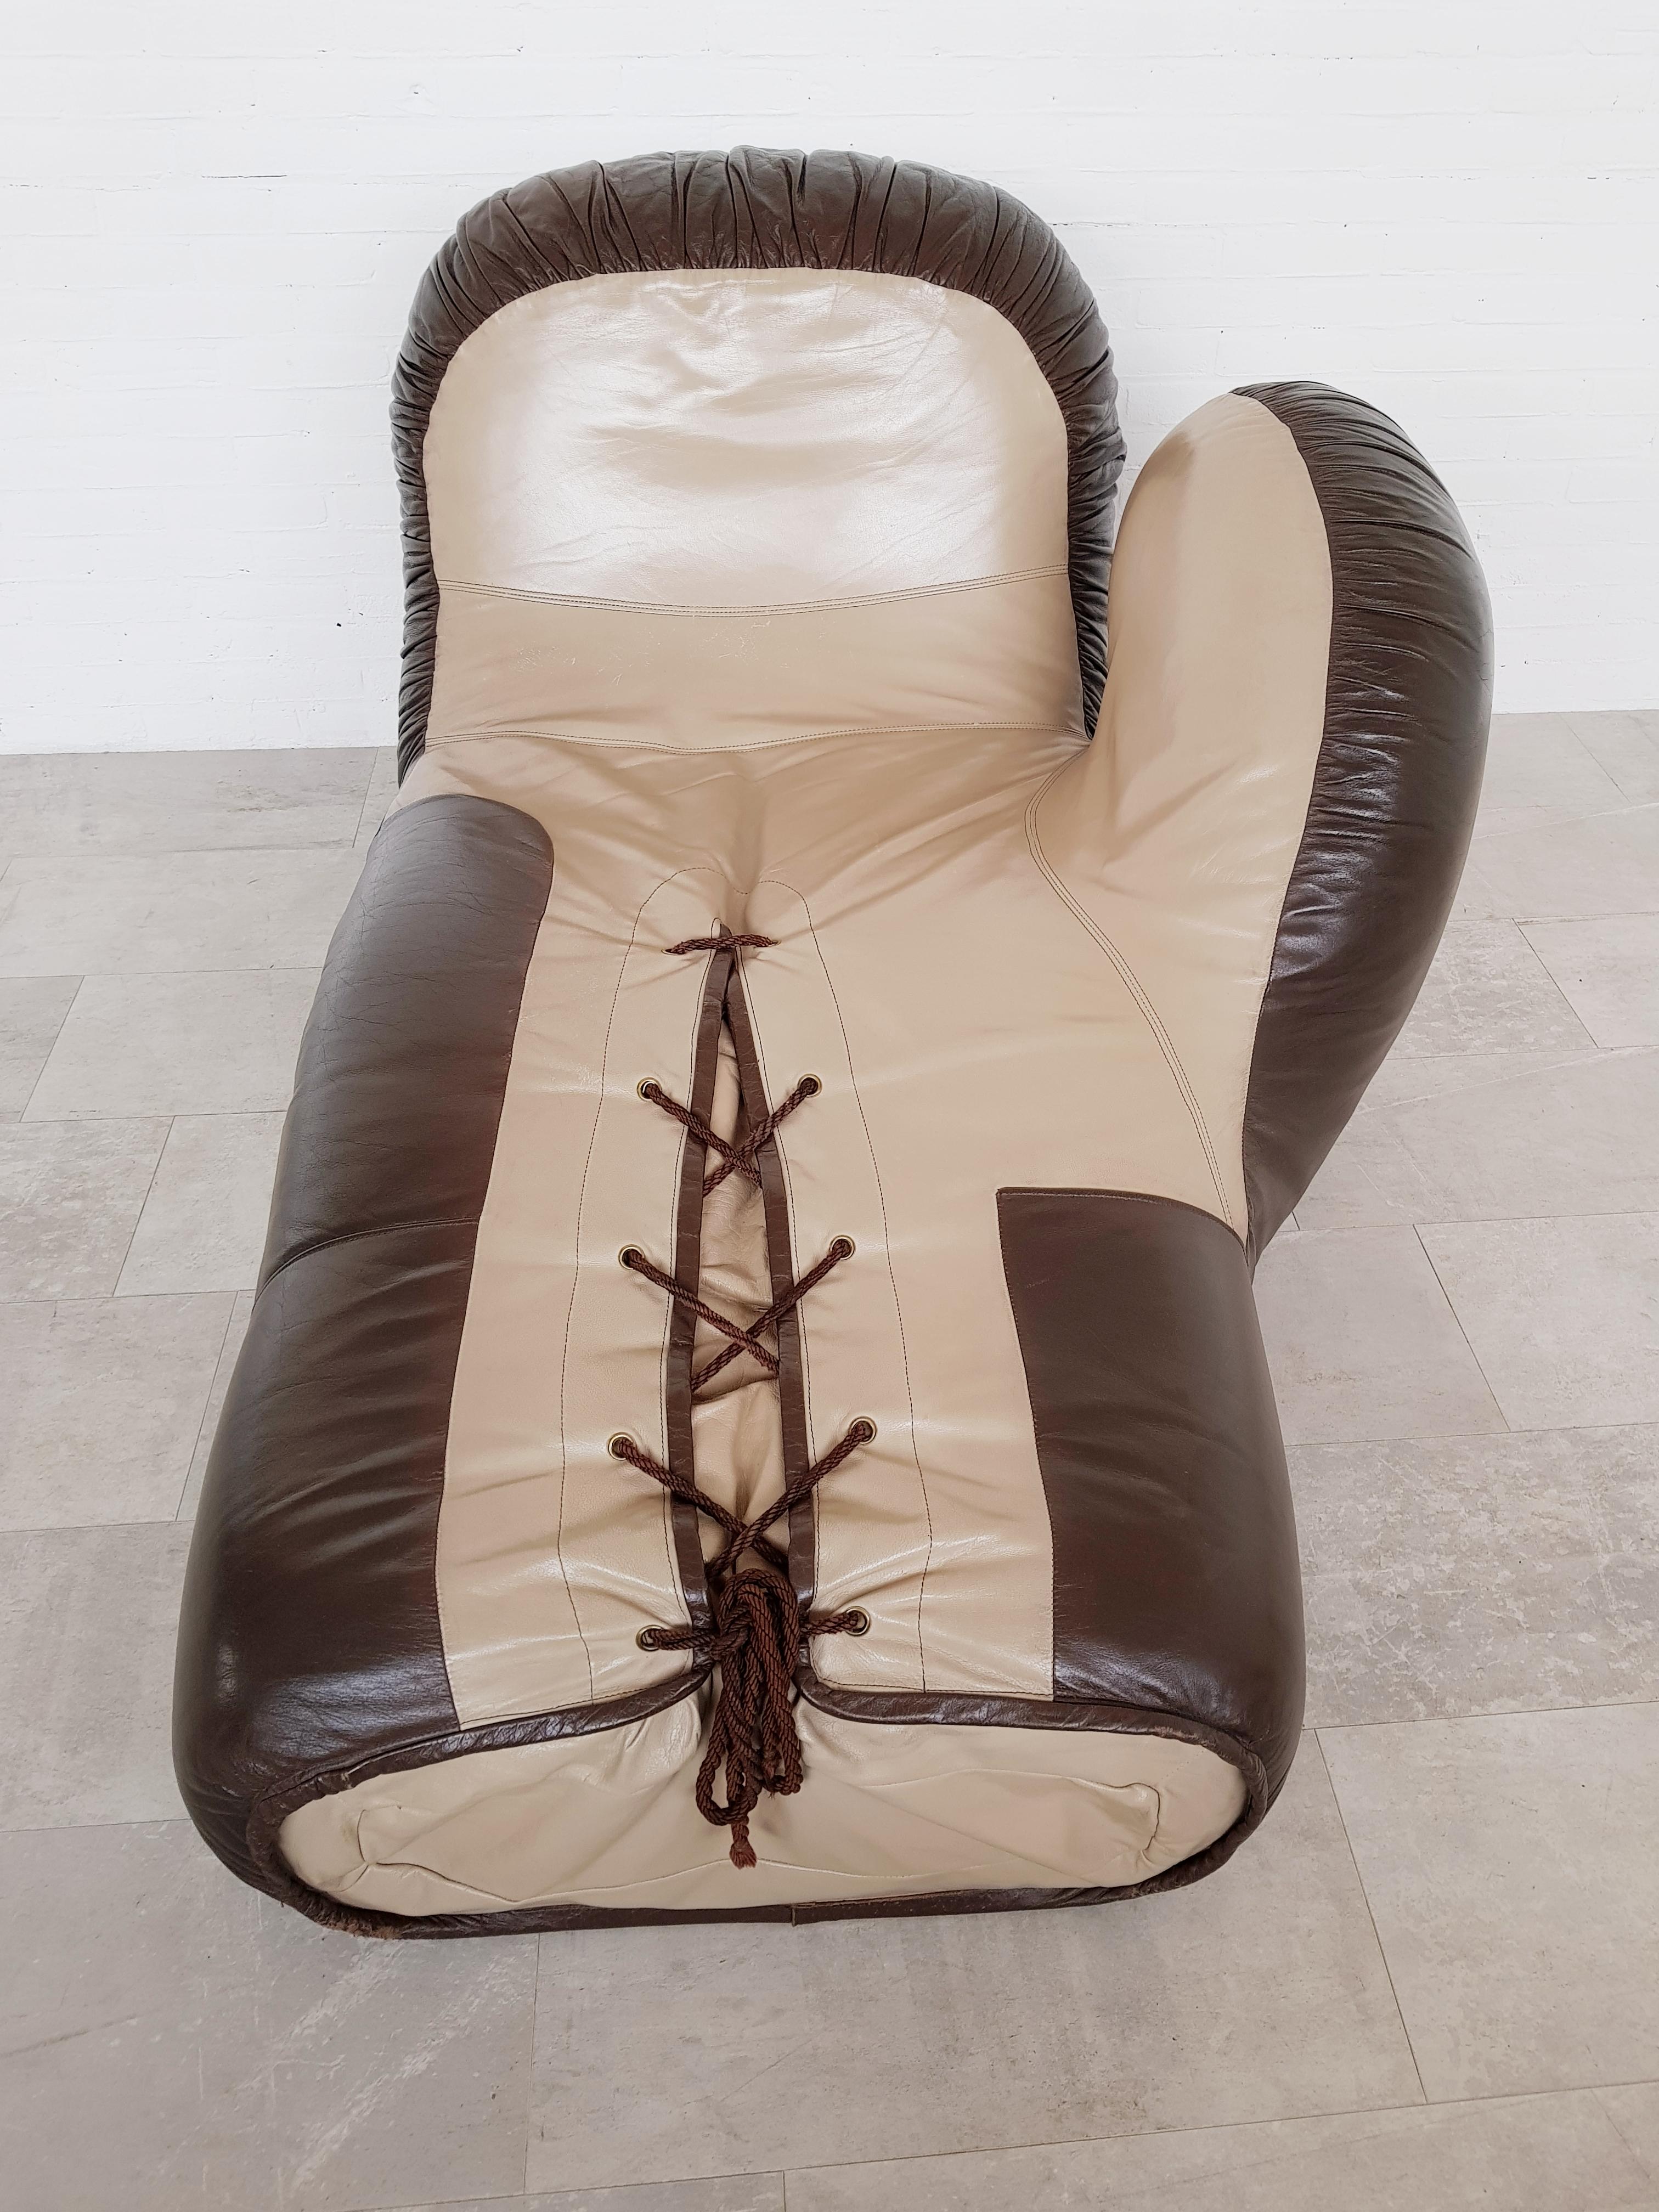 European Leather boxing glove lounge chair by De Sede